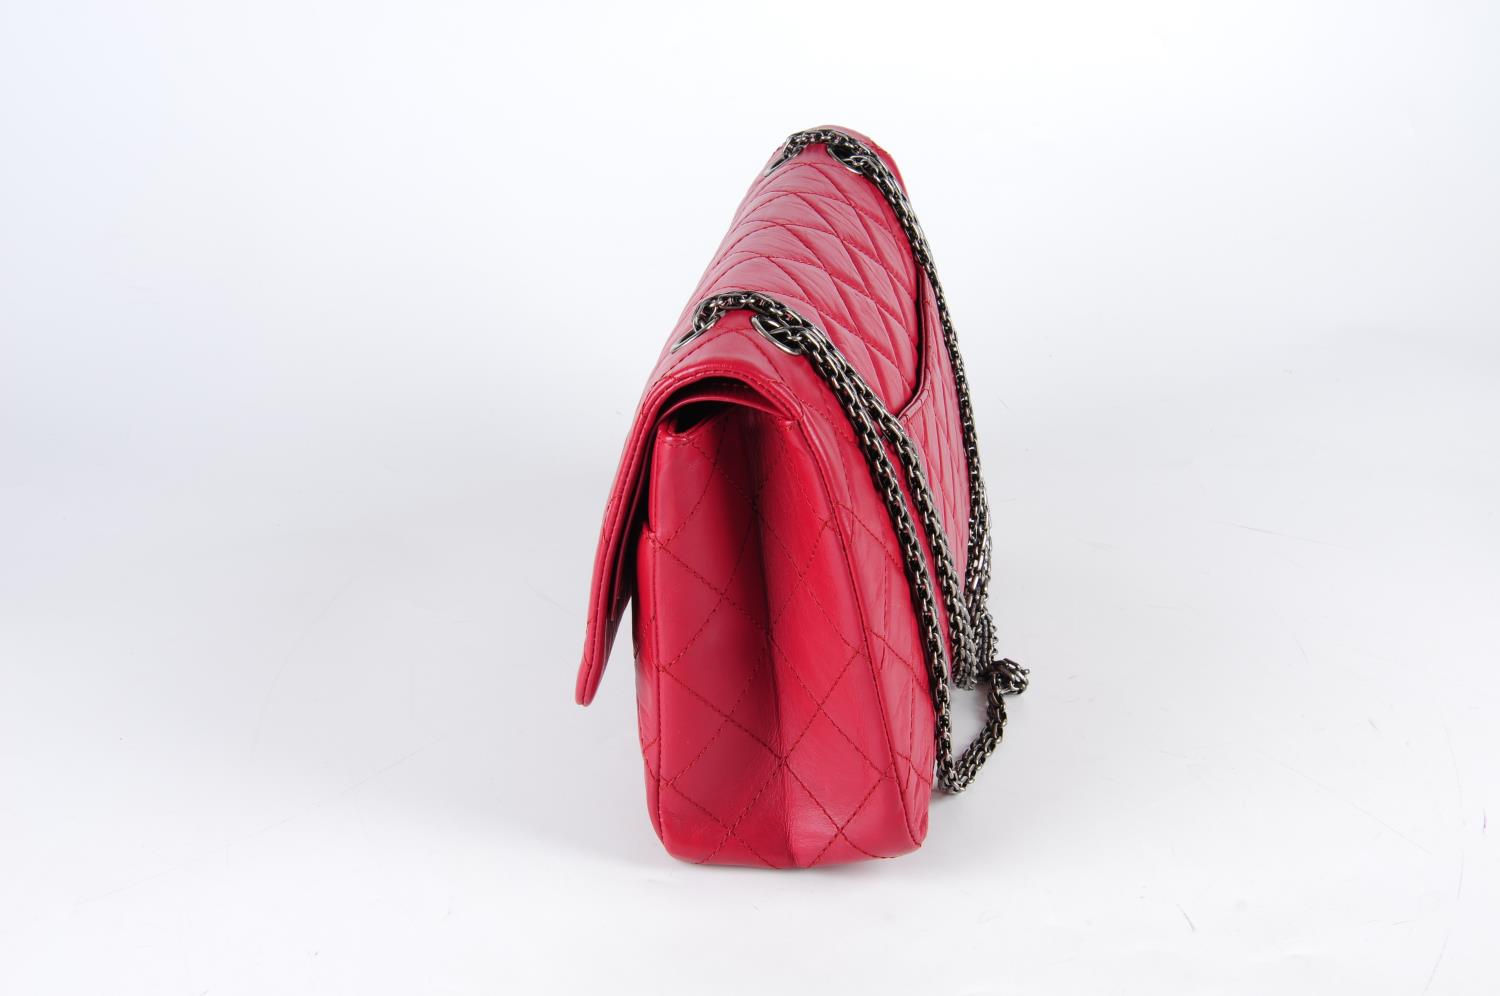 CHANEL - a red 2.55 Reissue 227 handbag. - Image 3 of 4